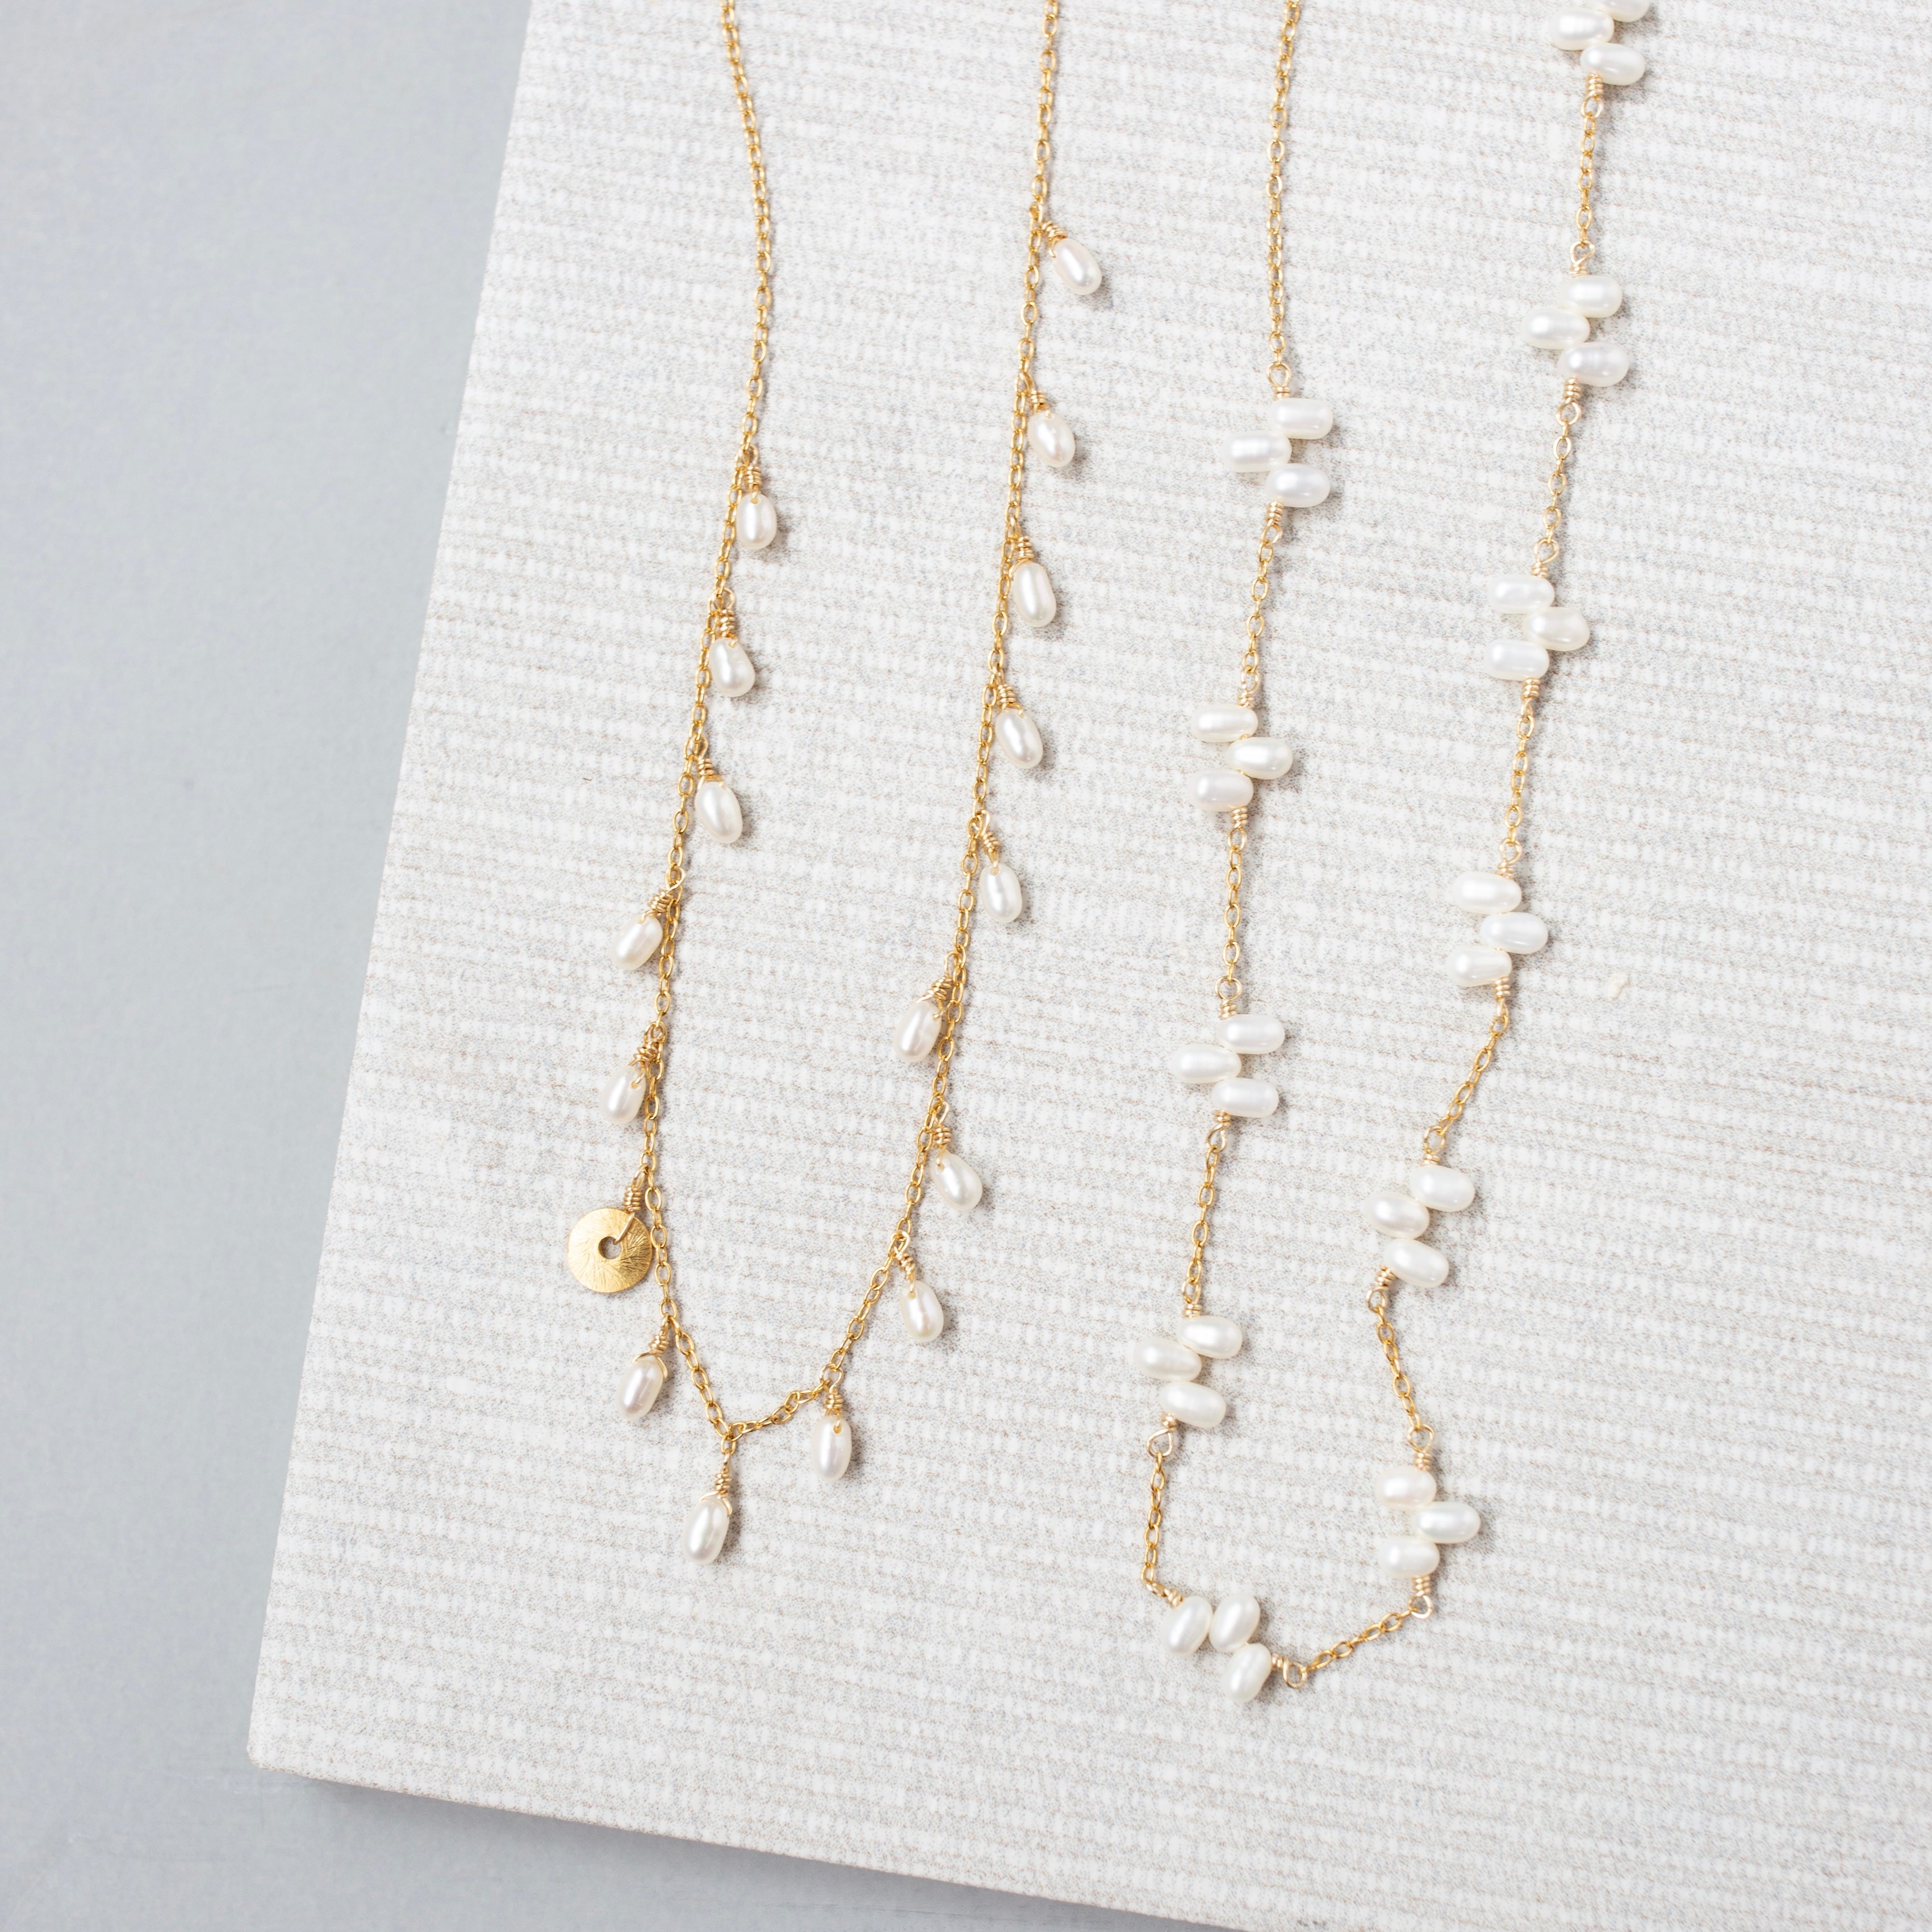 Freshwater Bead Pearl Necklace with 14k Gold-Plated Chain